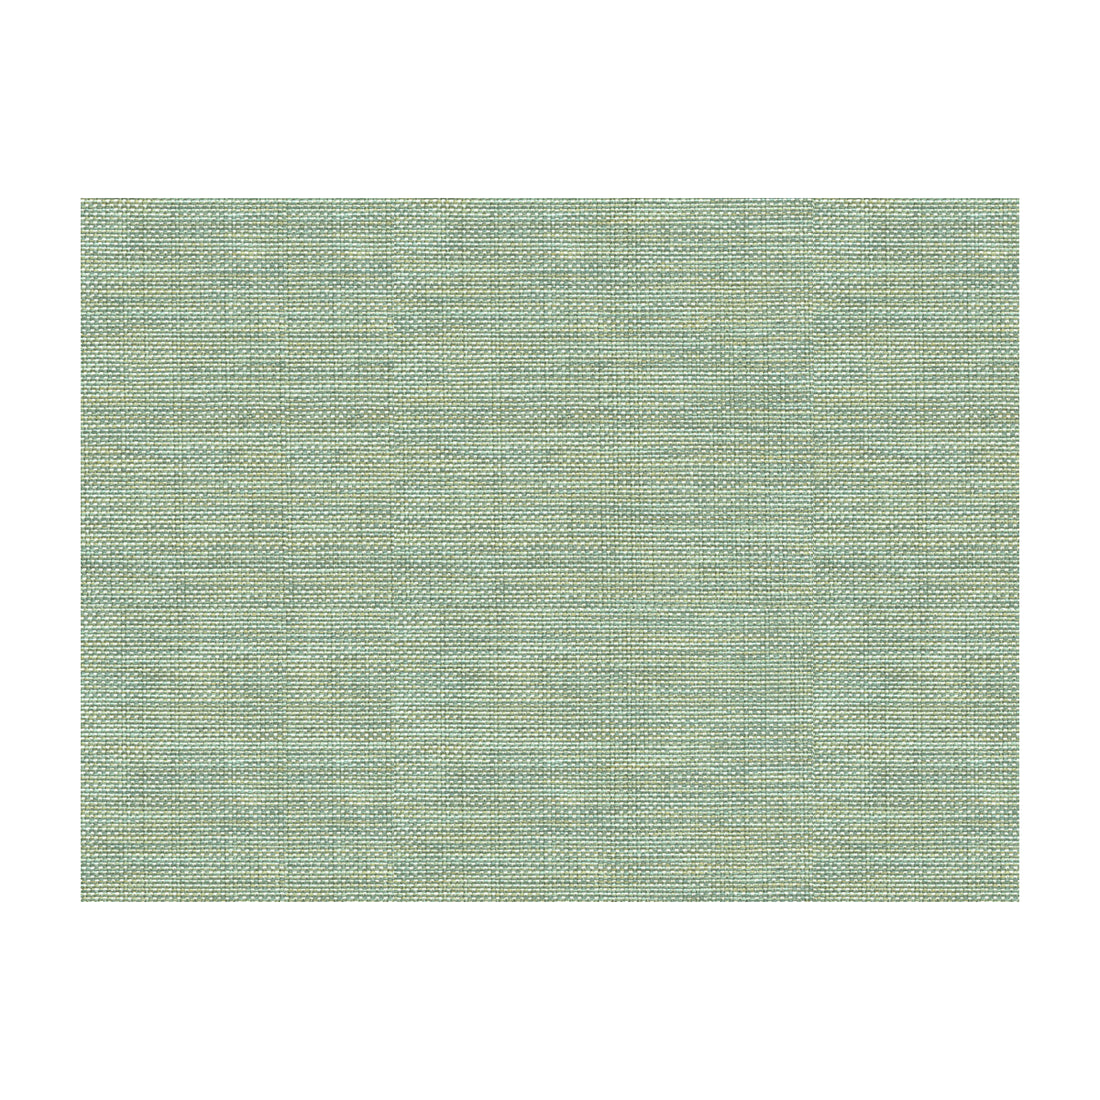 Kravet Basics fabric in 30299-13 color - pattern 30299.13.0 - by Kravet Basics in the Perfect Plains collection